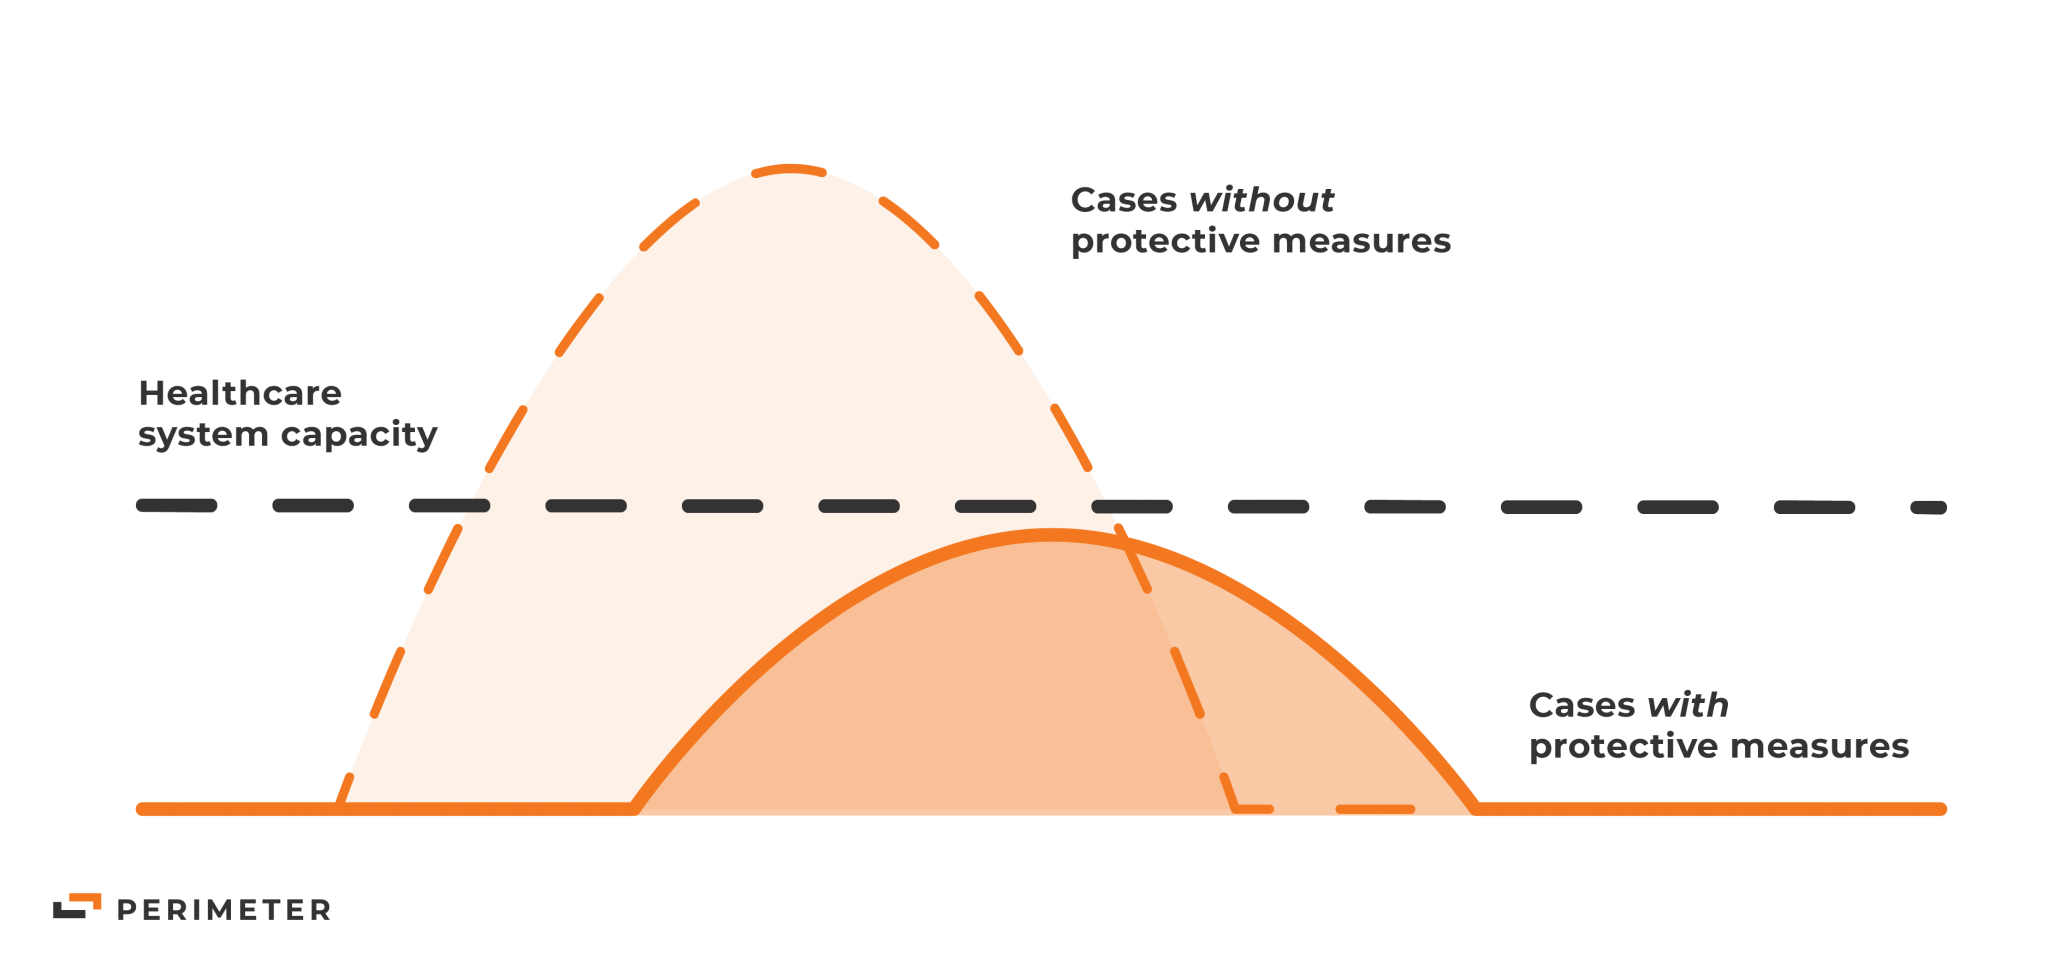 This visualization of flattening the curve shows the benefit of social distancing. The left-most peak shows the volume of cases without engaging protective measures against COVID-19. The right-most peak shows the volume of cases with those protective measures in place. The center line indicates the total healthcare system capacity.